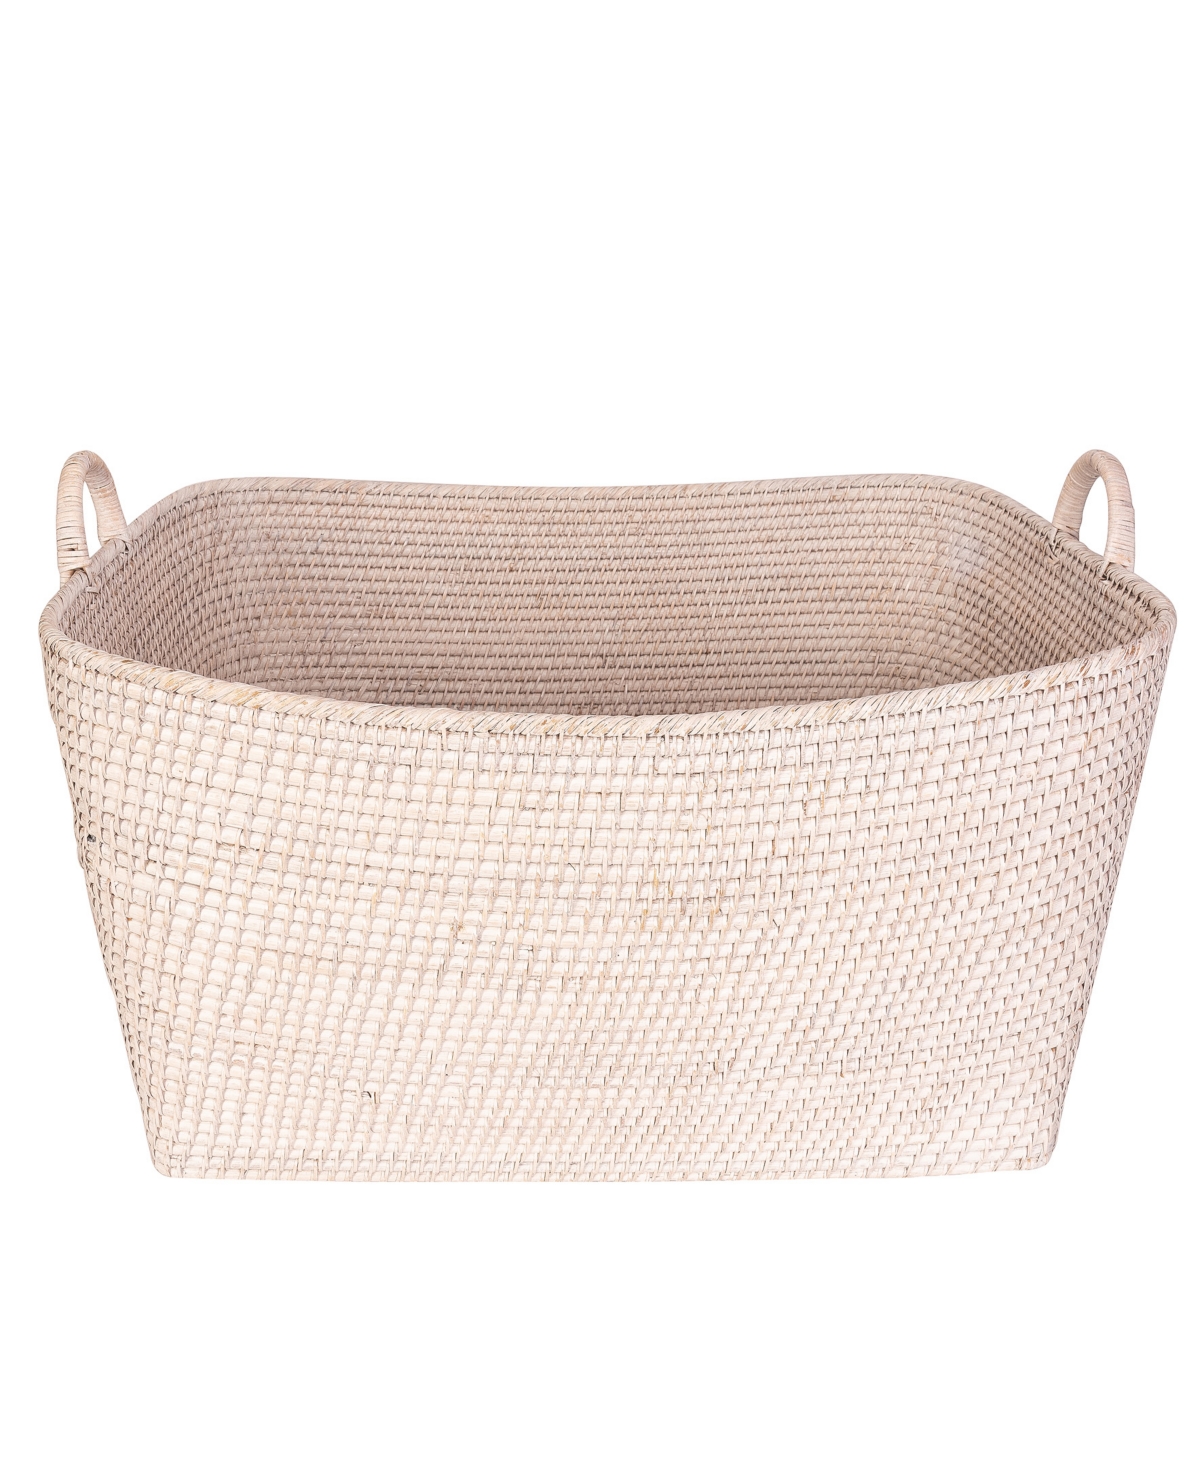 Saboga Home Everything Basket with Hoop Handles - White Wash